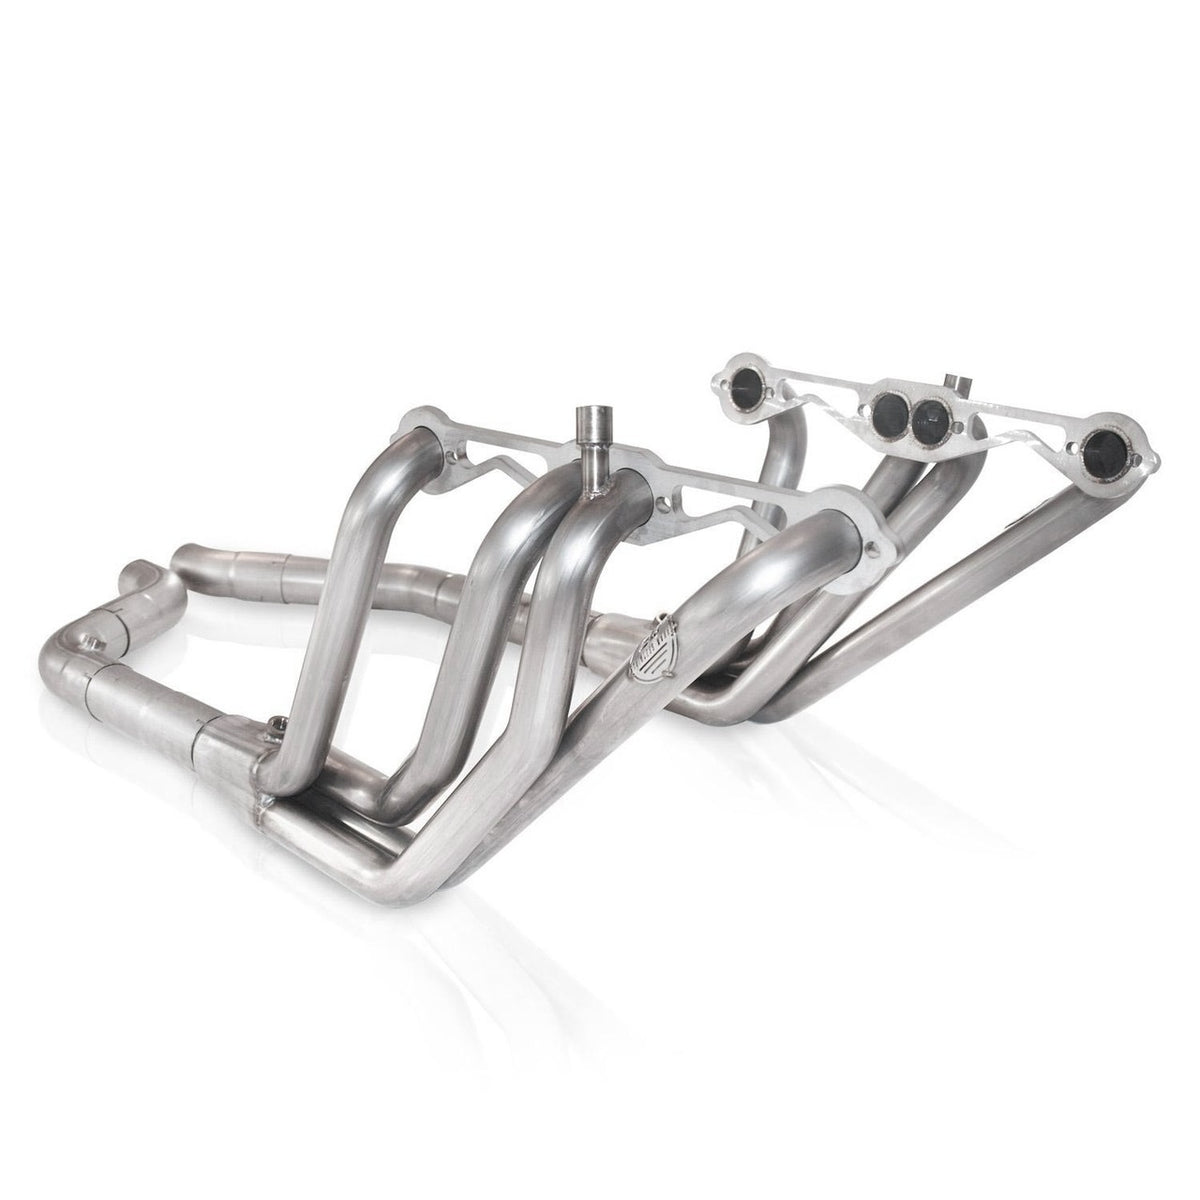 1992-96 CORVETTE HEADERS: OFF-ROAD 2-1/2" LEADS, STAINLESS WORKS